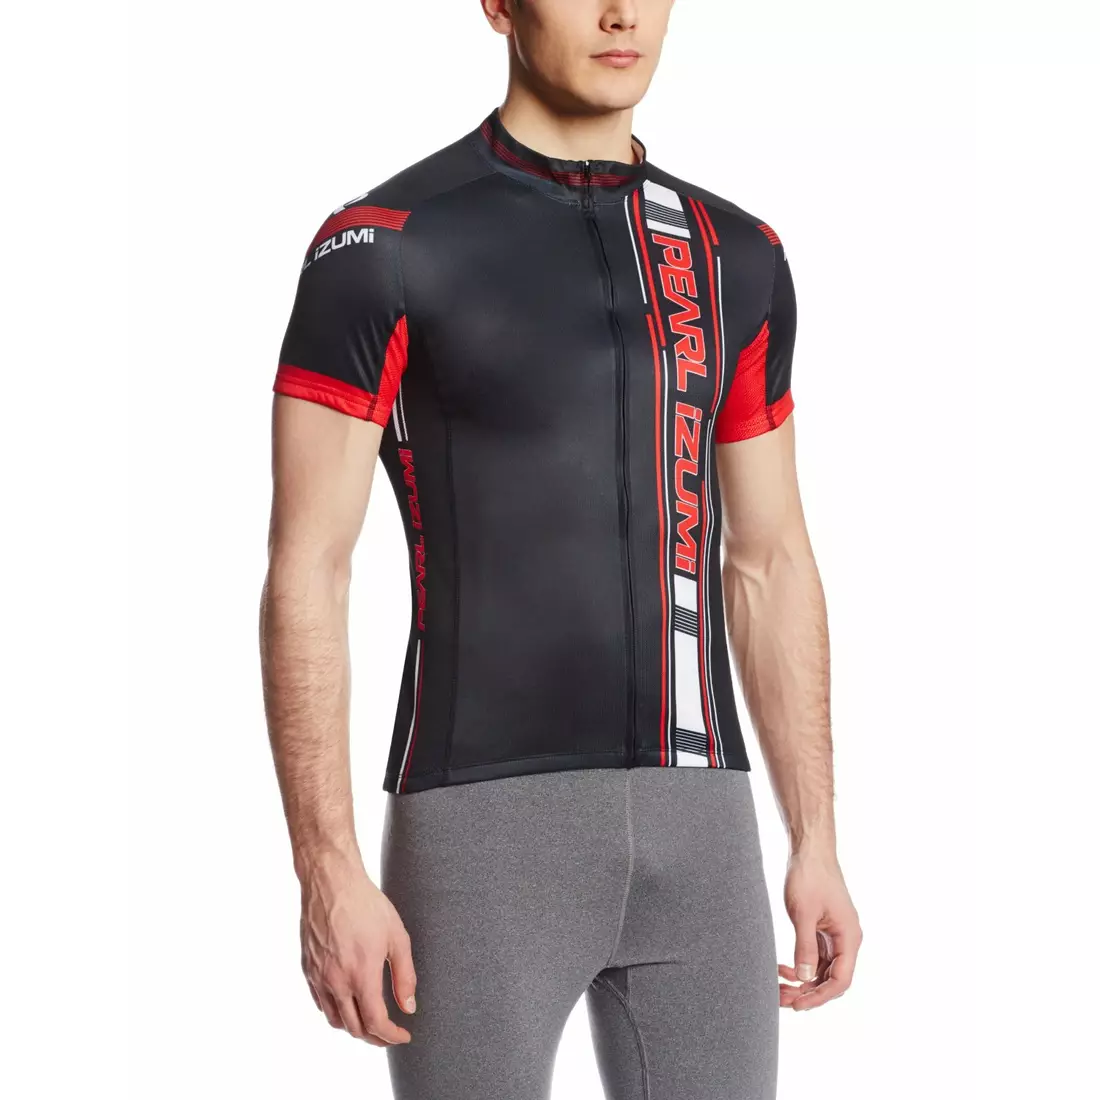 PEARL IZUMI - 11121371-4IR ELITE LTD - men's cycling jersey, color: Black and red